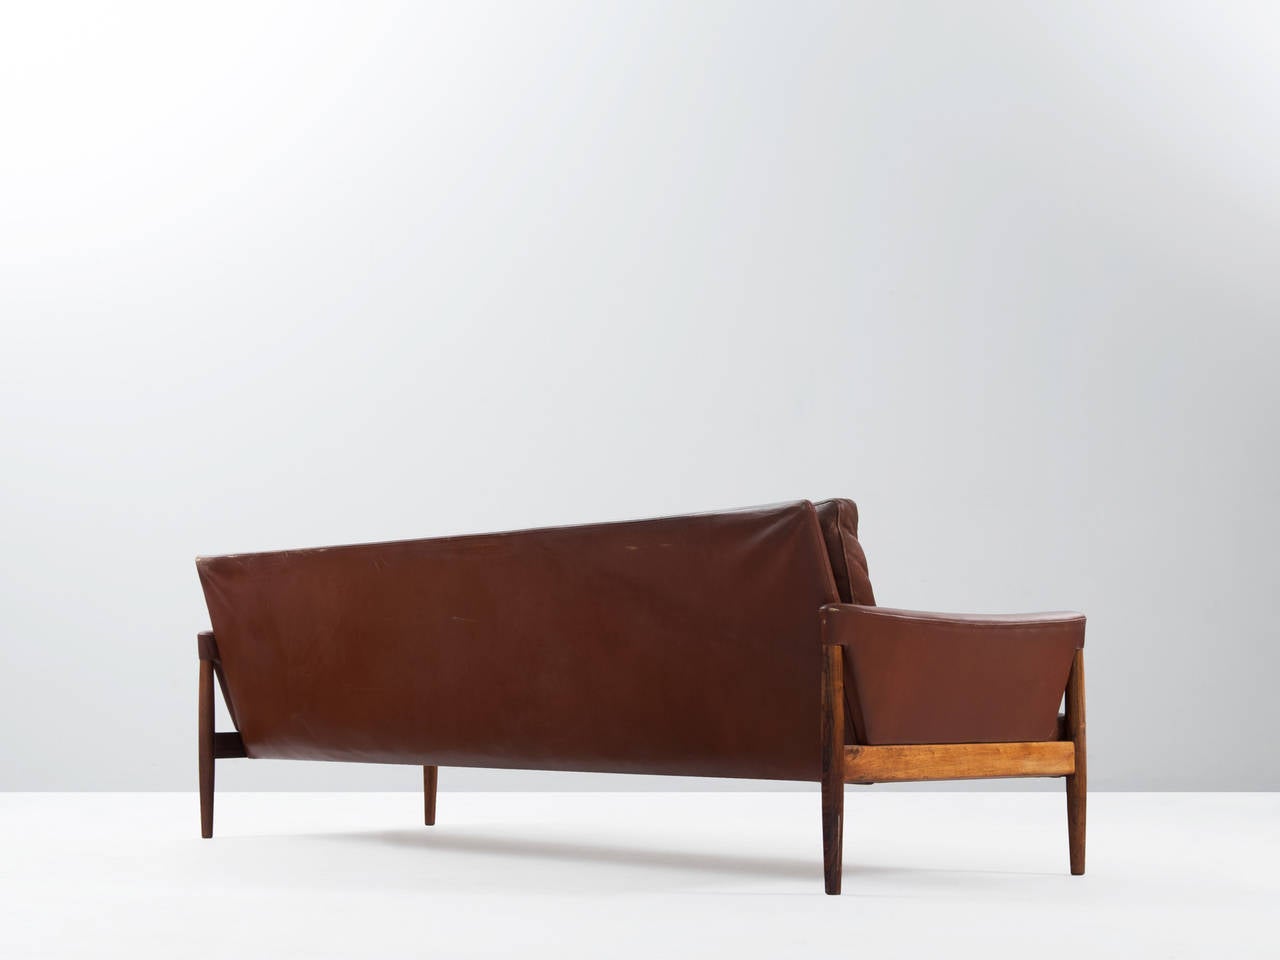 Superb designed four-seat sofa from Danish origin, 1960s.

This sofa, which is still upholstered in it's original leather. Has been designed with some very nice details, which can be seen in the armrest and the shape of the tapered legs, which are